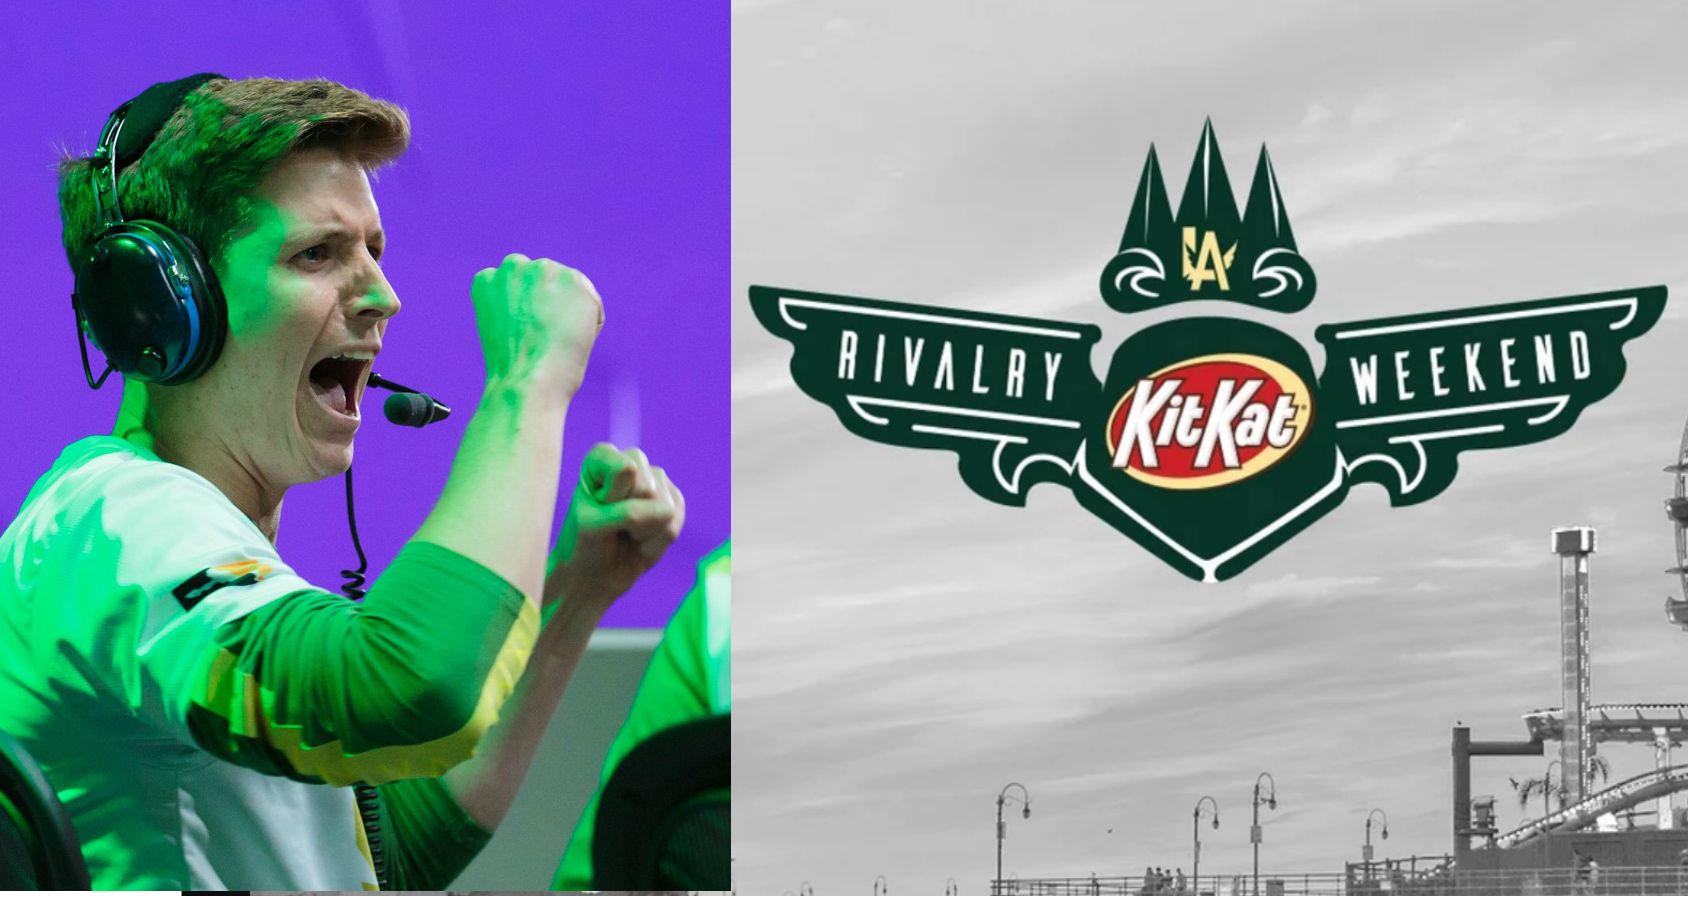 Overwatch Leagues KitKat Rivalry Weekend Was An Exciting Look Into The Future Of The League